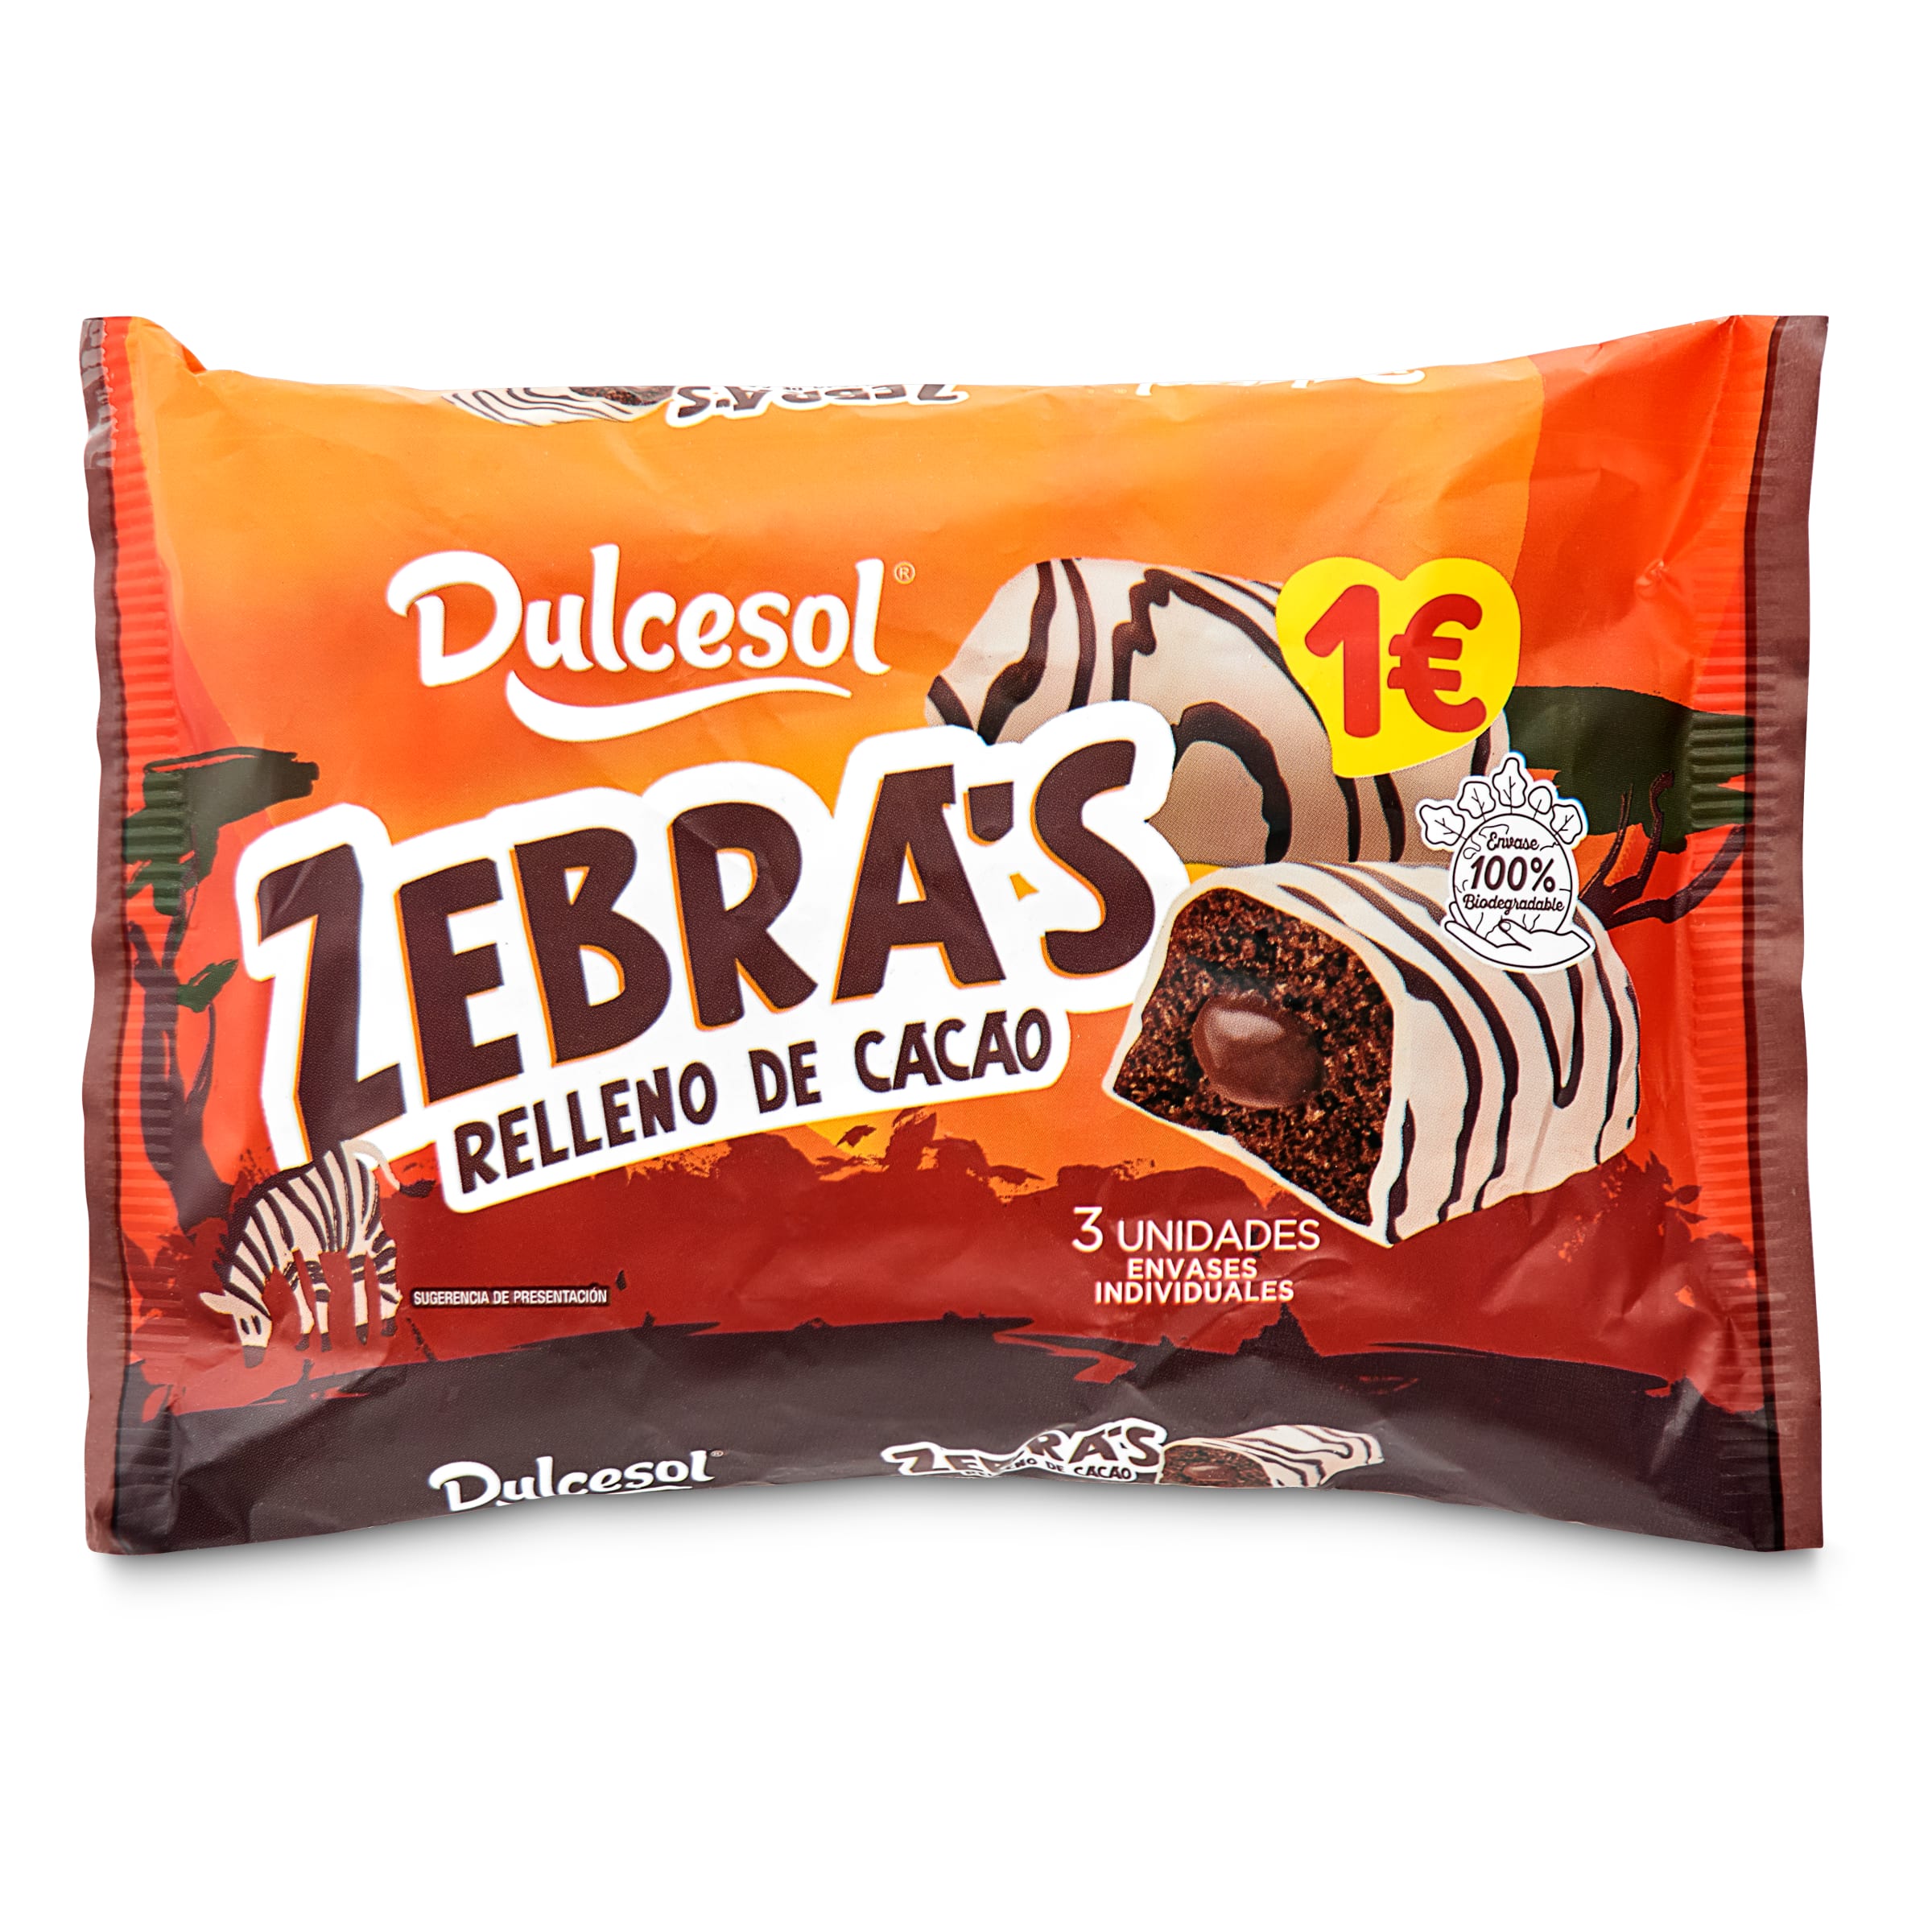 Dulcesol Zebra's Chocolate Filled Cakes 3 Pack 120g (Sep 23) RRP £1 CLEARANCE XL 89p or 2 for £1.50